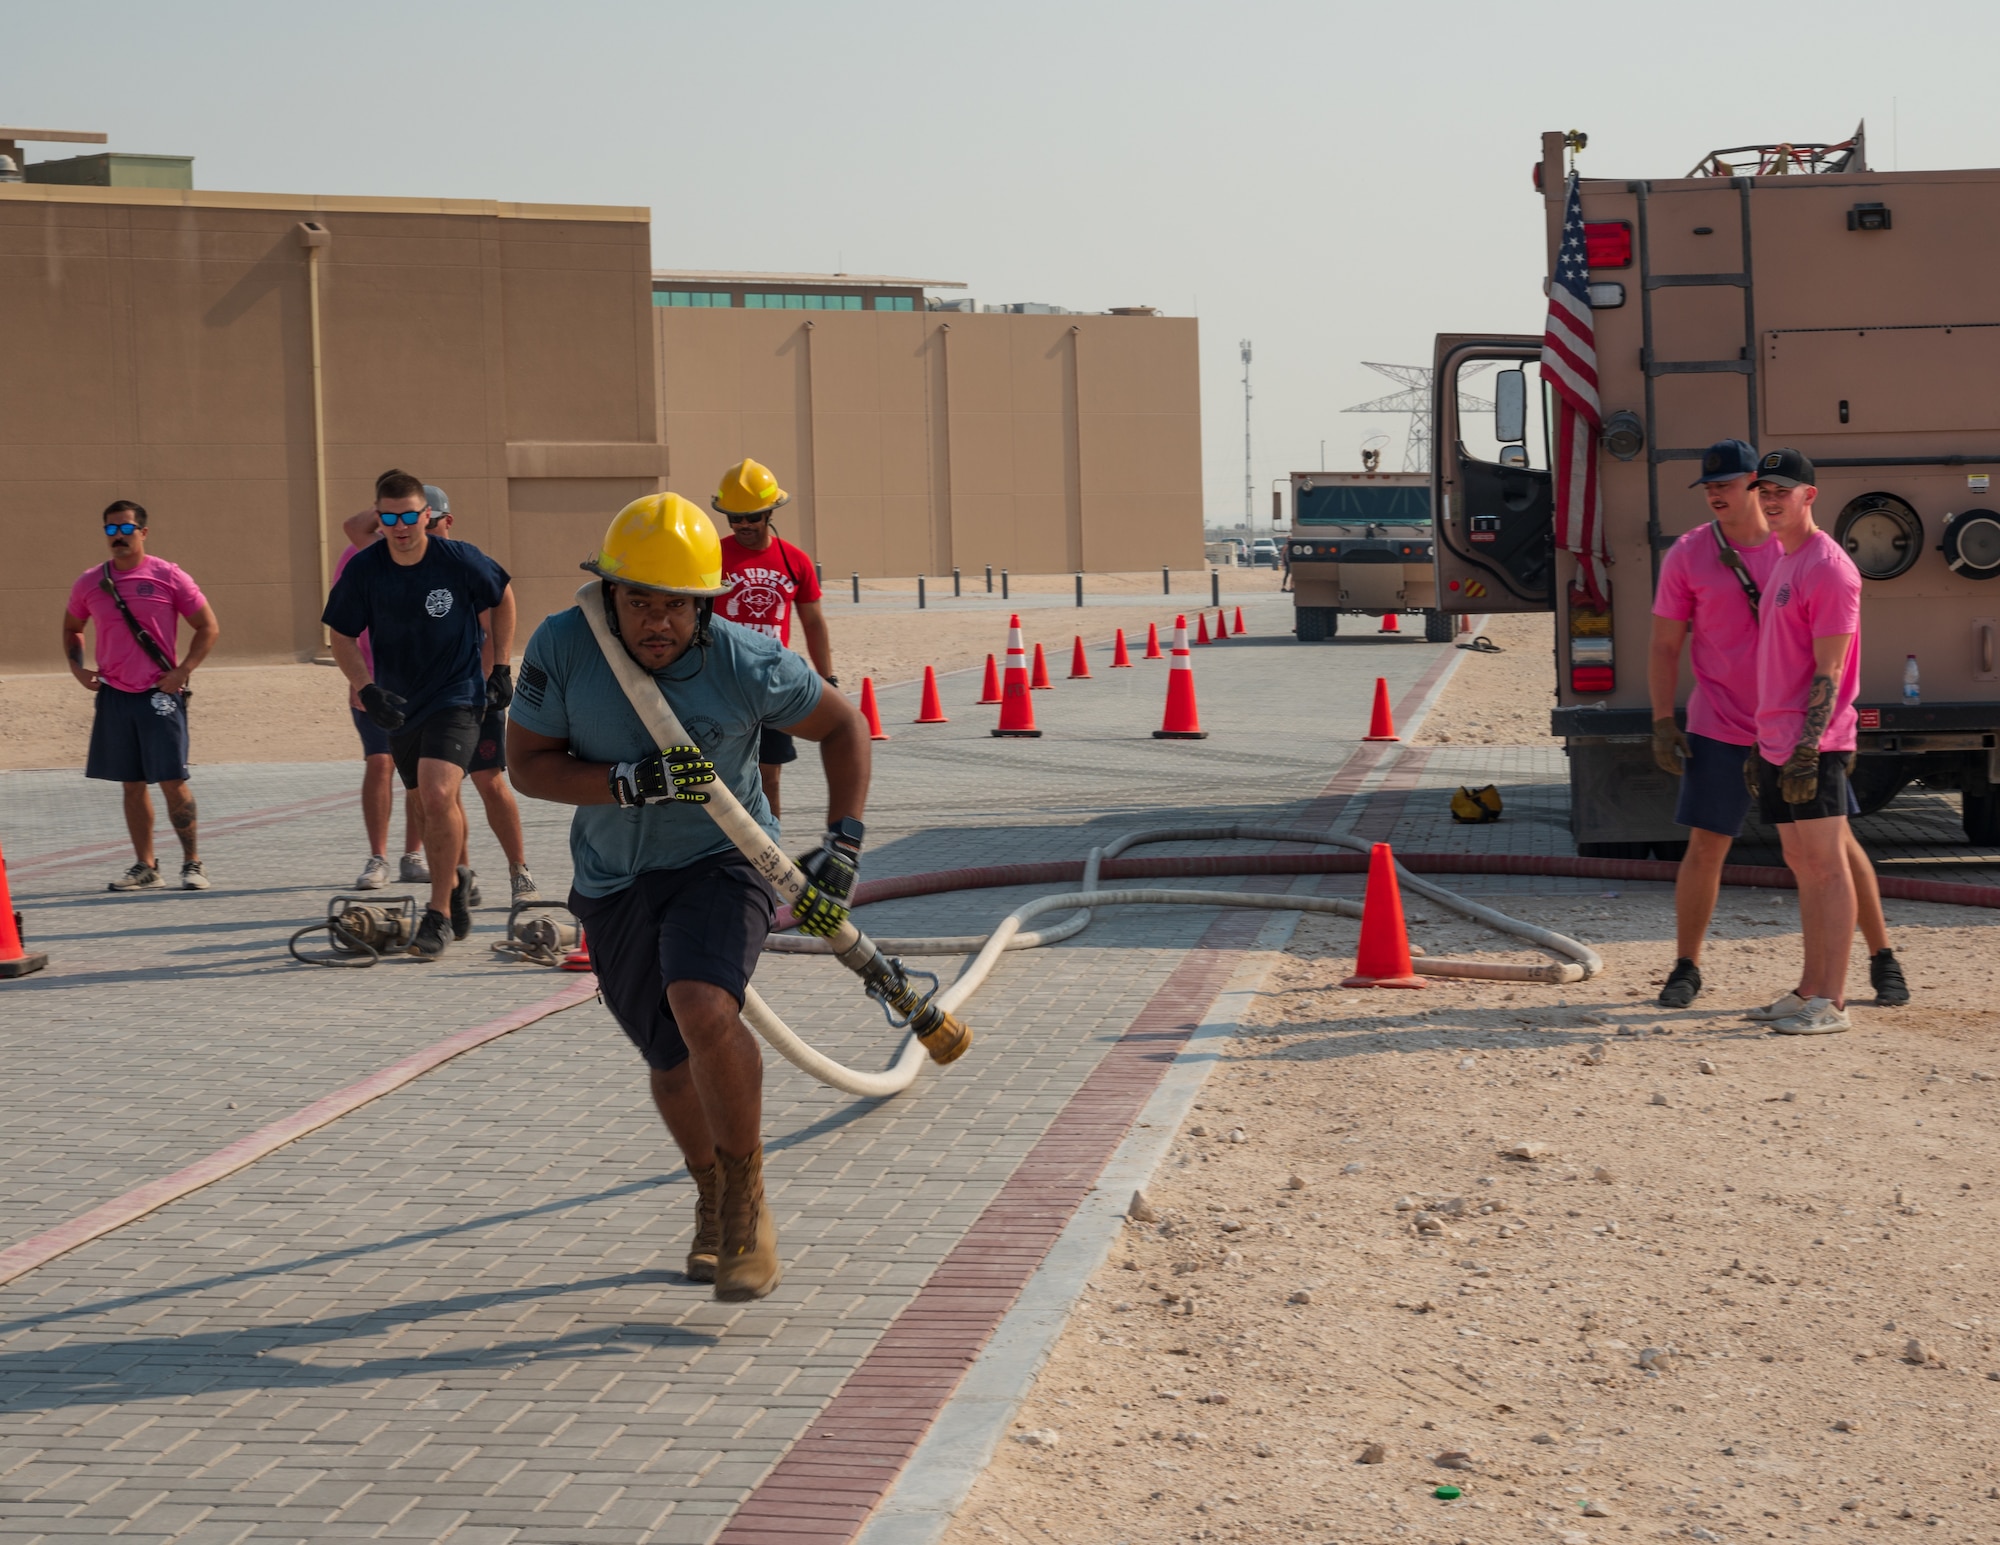 .S. Air Force firefighters assigned to the 379th Expeditionary Civil Engineering Squadron run with a fire hose while competing in the fire rodeo exercise Oct 15, 2022 at Al Udeid Air Base, Qatar. During fire safety week the firefighters conducted the fire rodeo where they hosted an open competition featuring elements of physical prowess needed to perform the lifesaving skills associated with their job. (U.S. Air Force photo by Staff Sgt. Dana Tourtellotte)